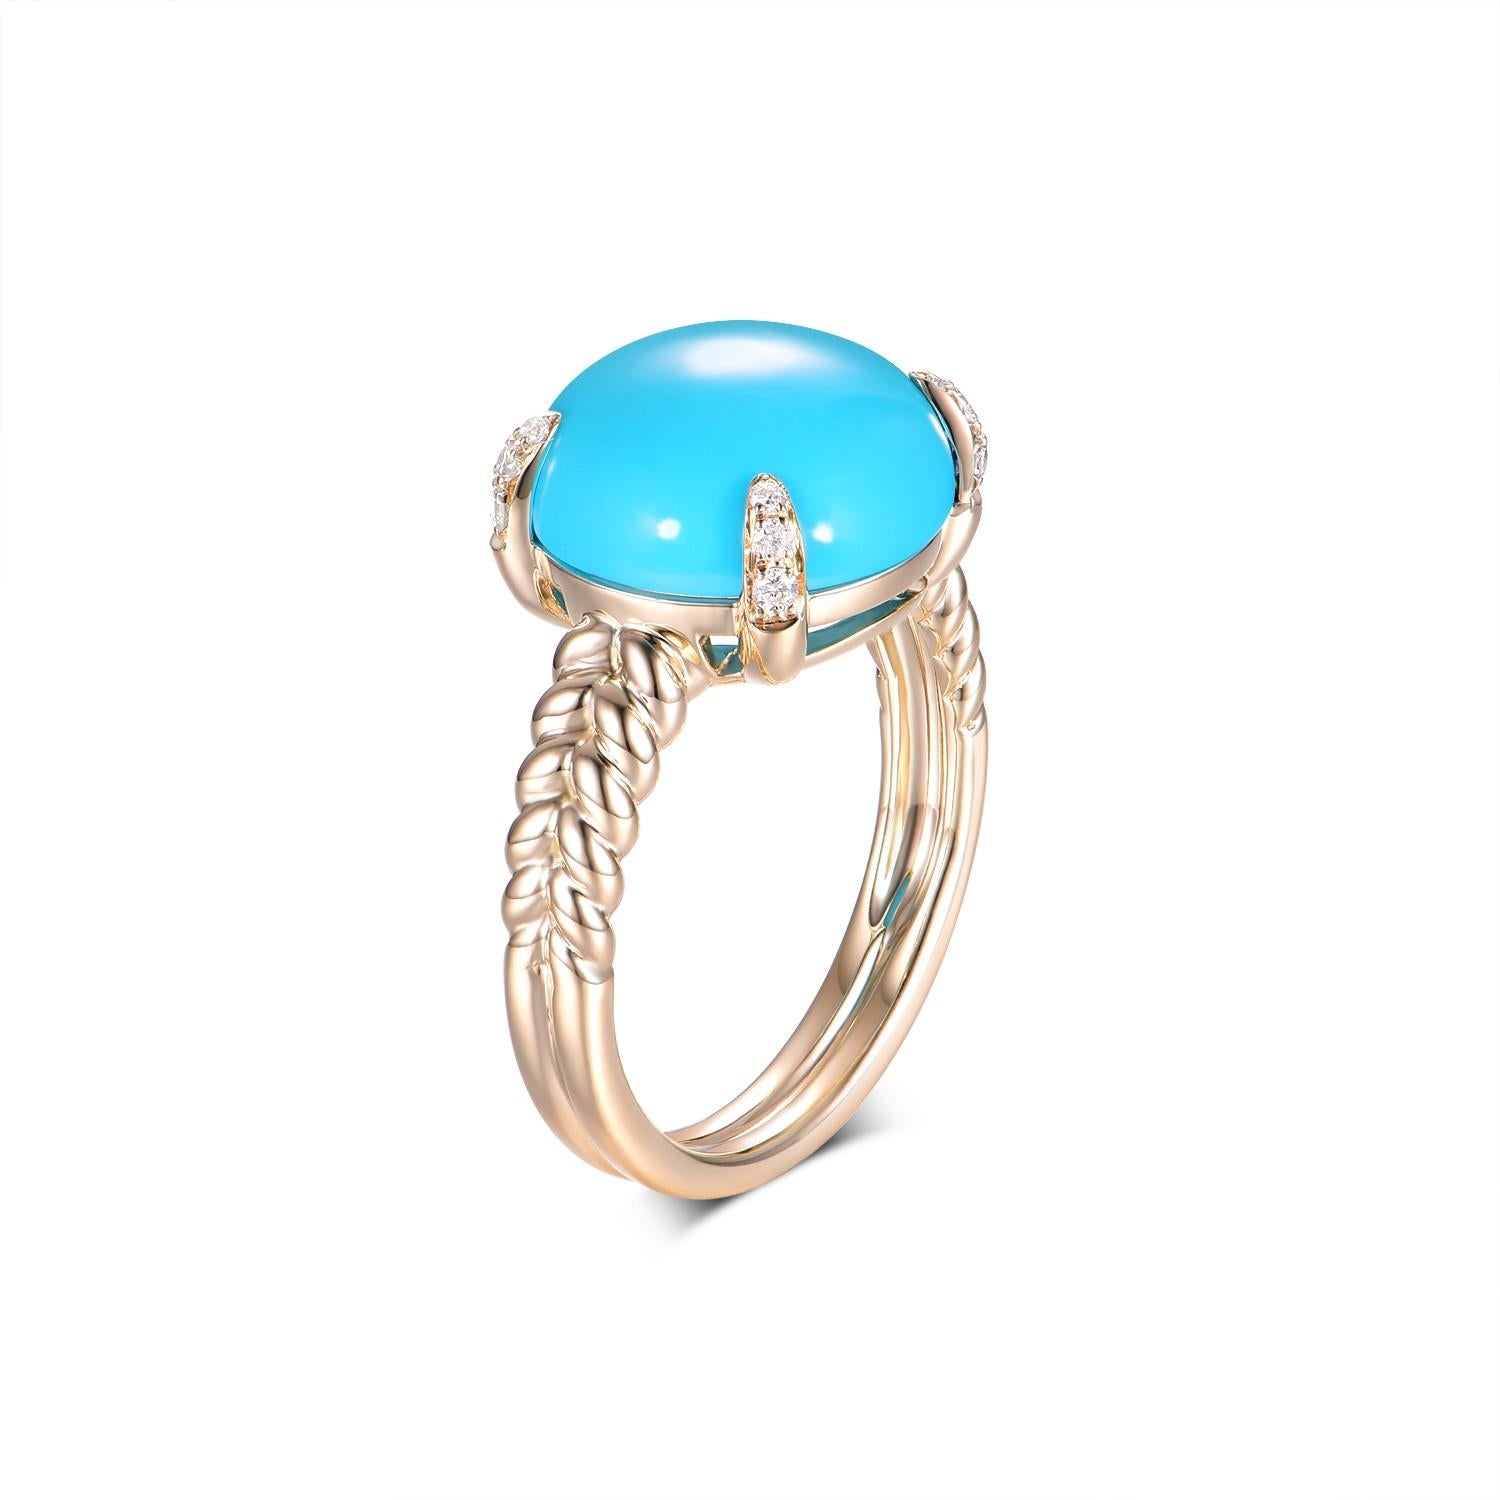 This ring is a remarkable piece that radiates serenity and luxury, set in 18-karat yellow gold that gleams with a high polish finish. It features a substantial oval cabochon turquoise, weighing 5.38 carats, held in place by a smooth bezel setting.